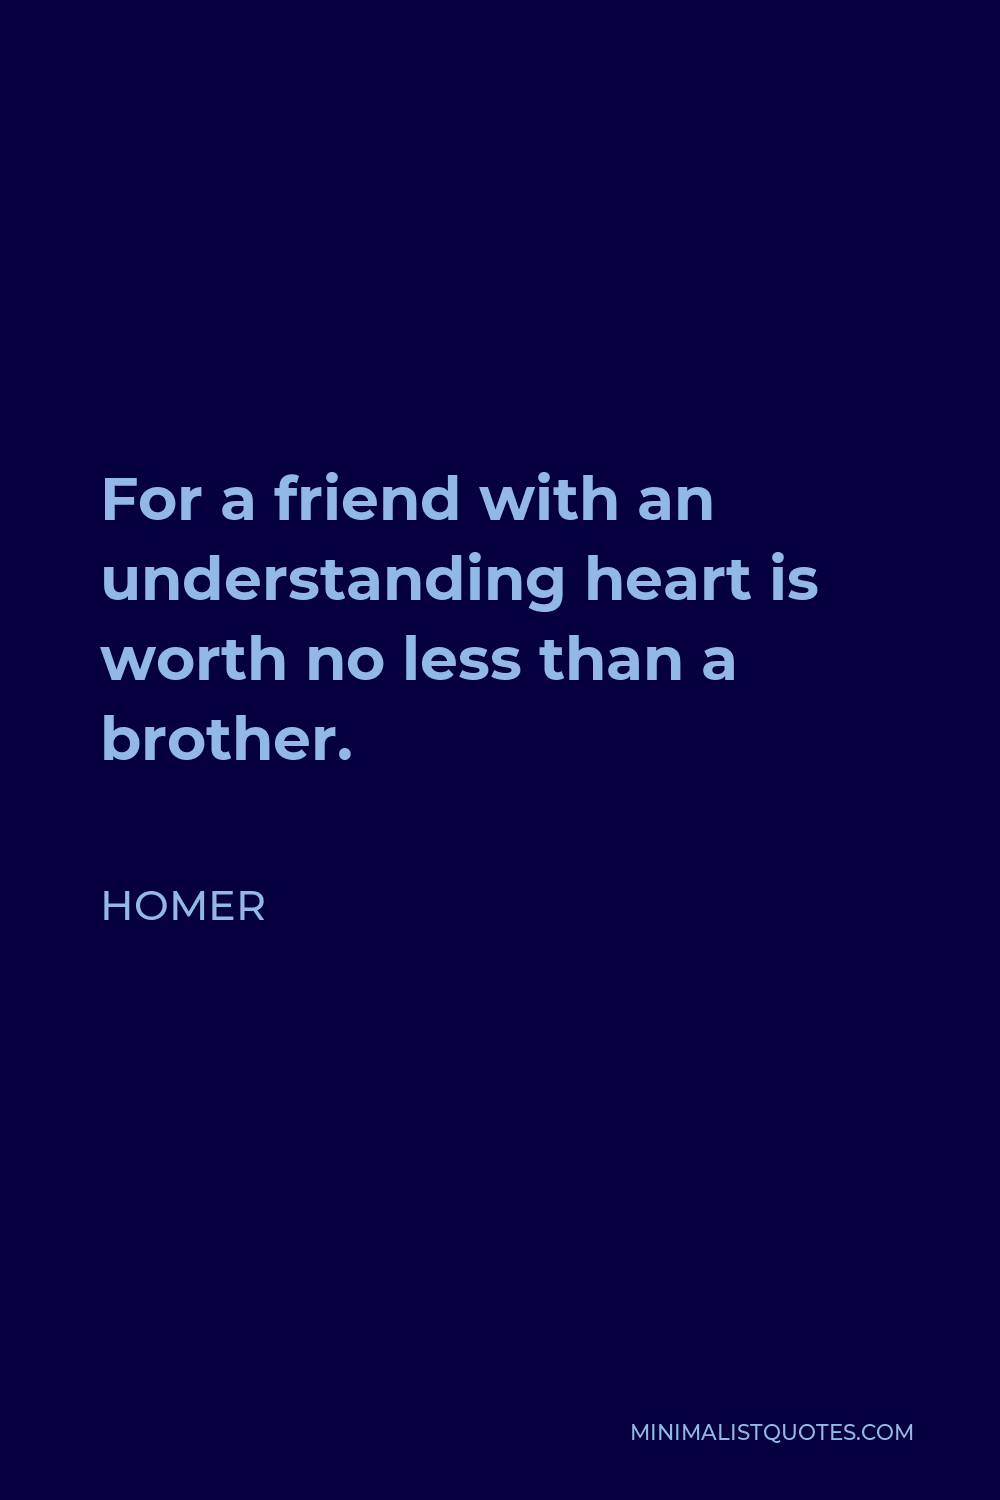 Homer Quote - For a friend with an understanding heart is worth no less than a brother.